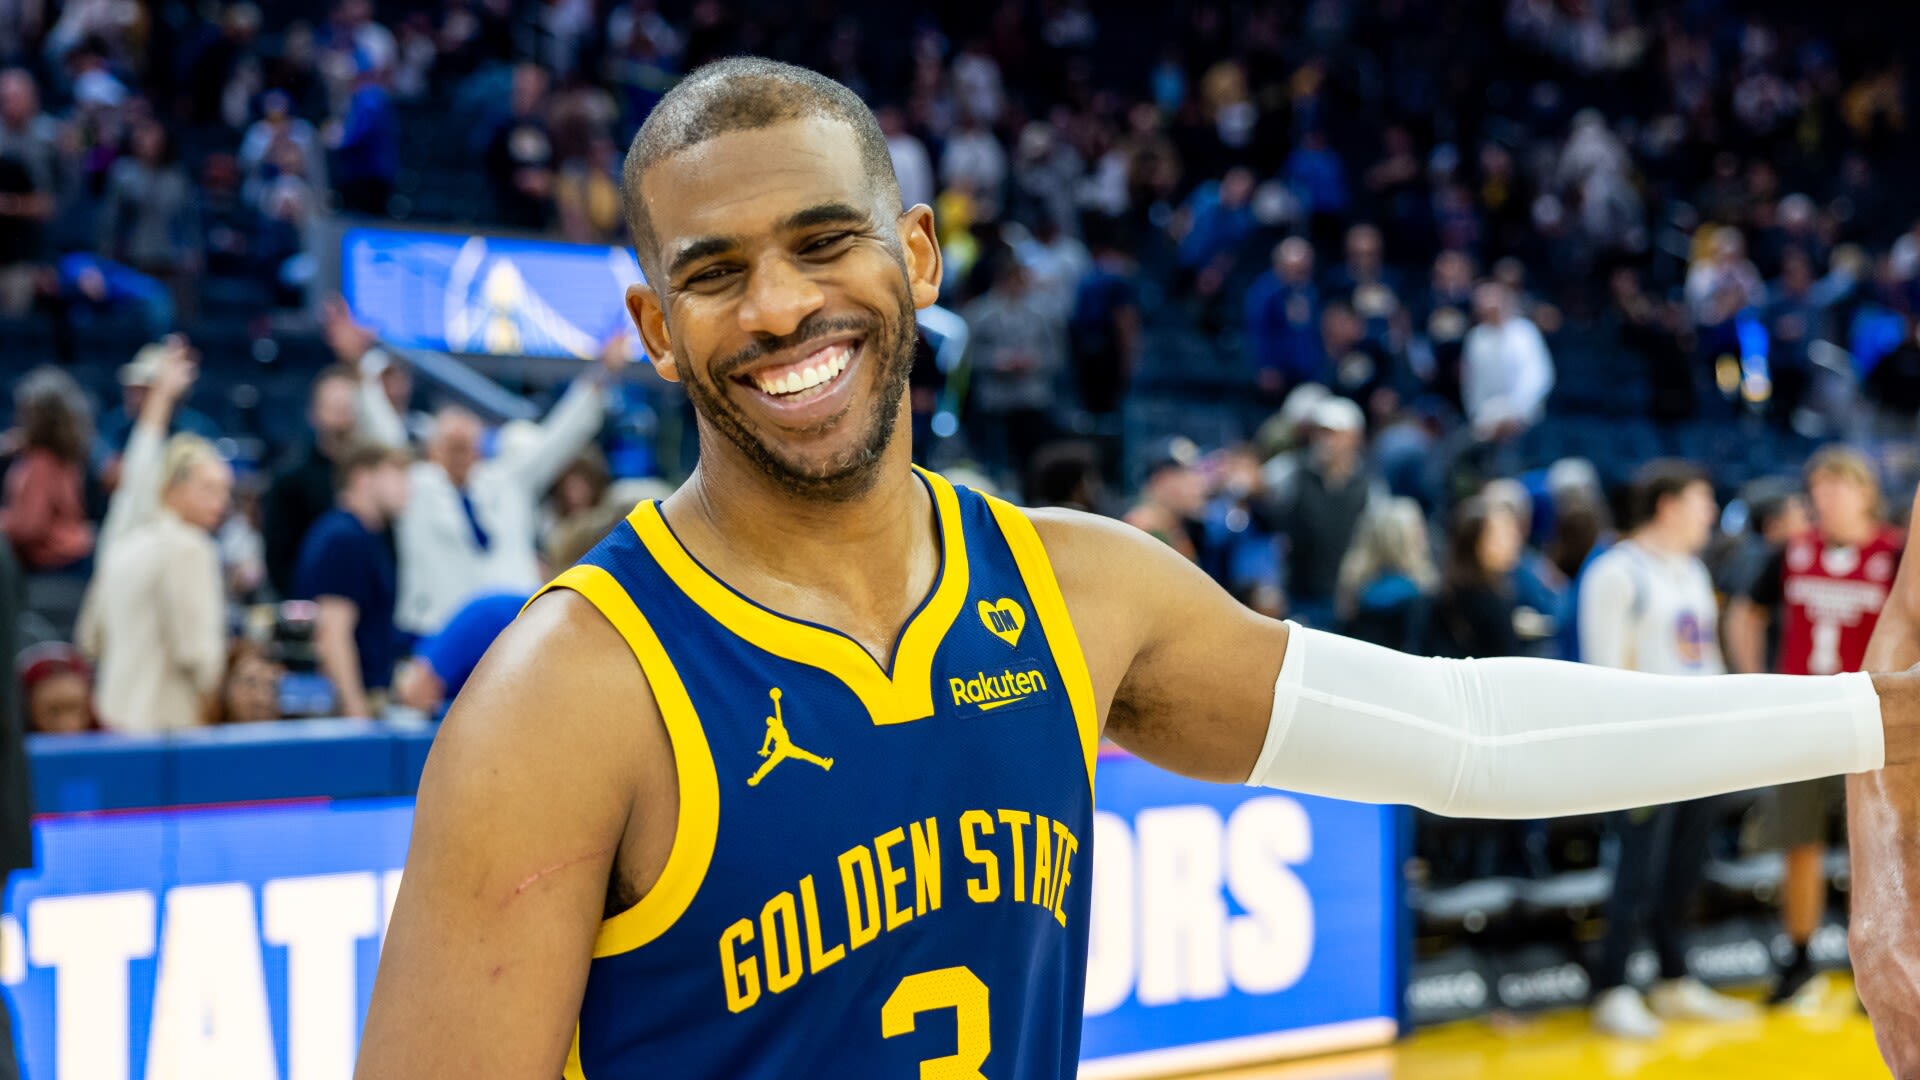 NBA free agency rumors roundup: Chris Paul pushes back deadline, LeBron to opt-out then re-sign